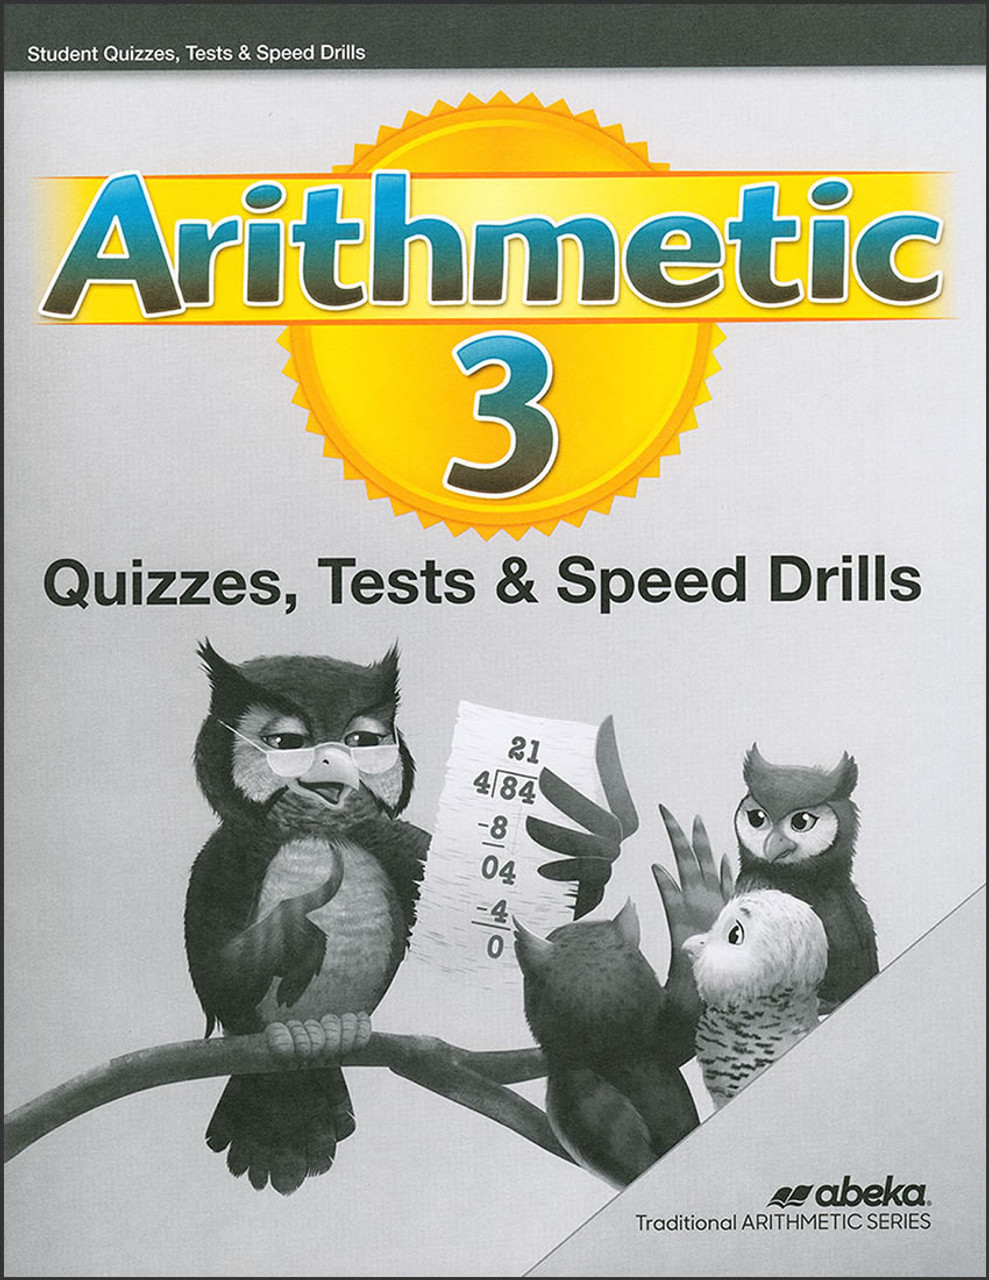 Arithmetic 3, 6th edition - Quizzes, Tests, & Speed Drills